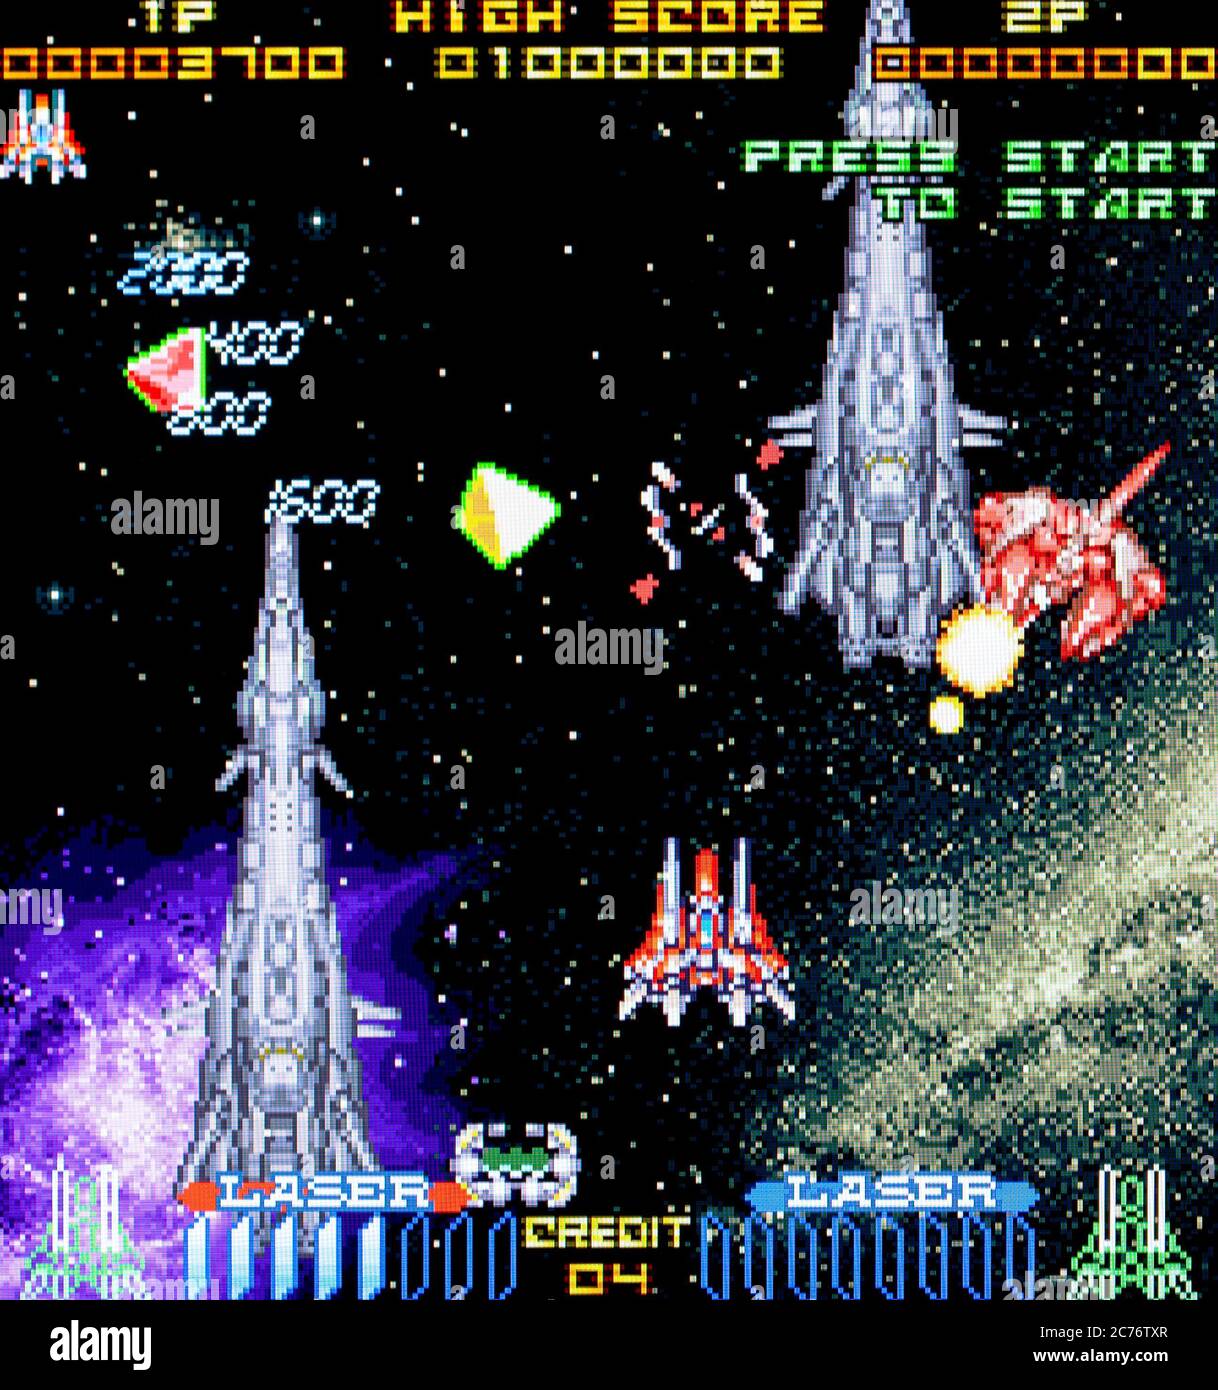 Galactic Attack - Sega Saturn Videogame - Editorial use only Stock Photo